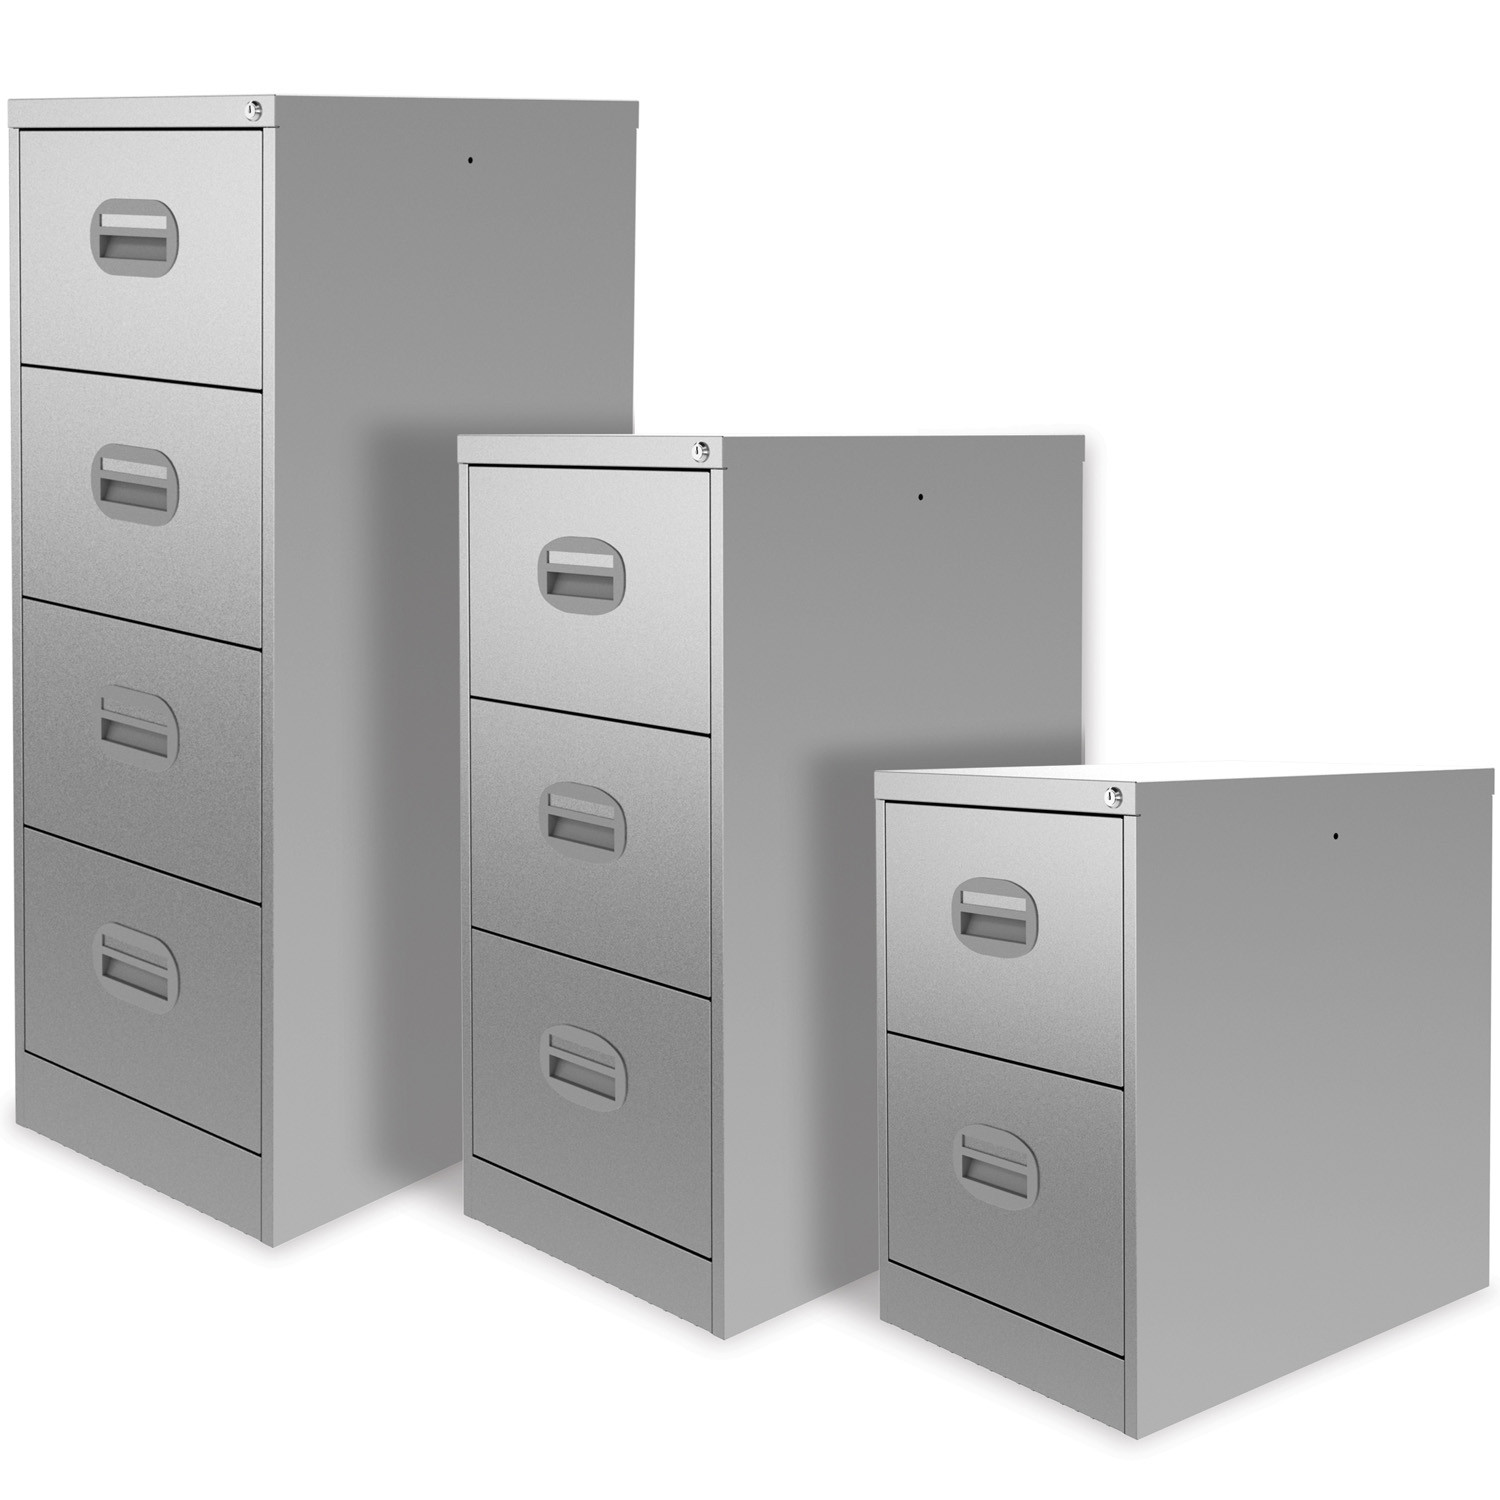 Kontrax Filing Cabinets in various sizes